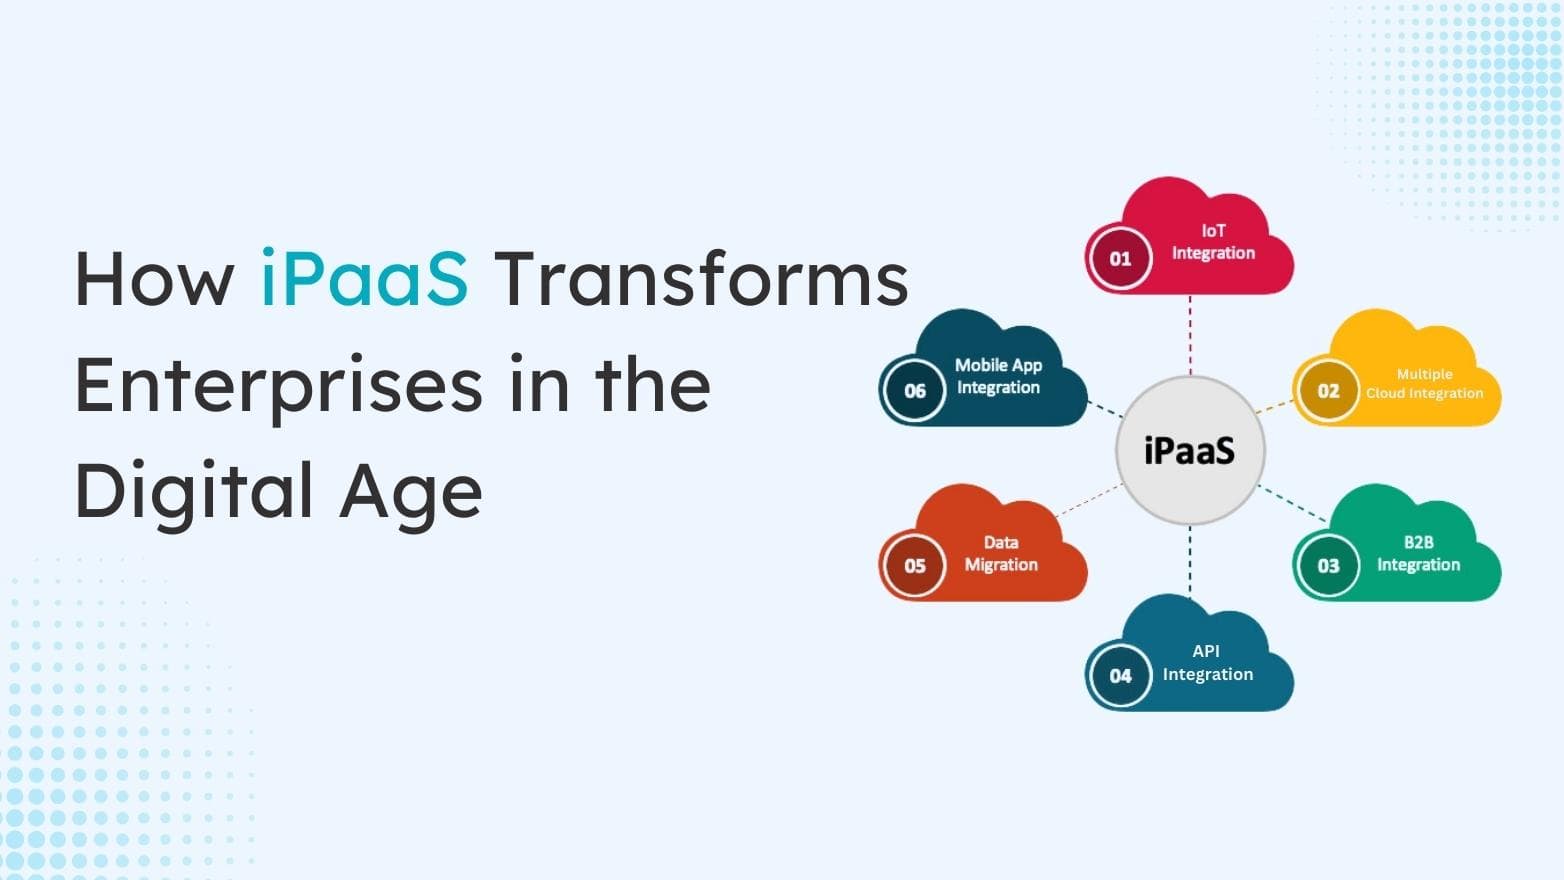 How iPaaS Transforms Enterprises in the Digital Age